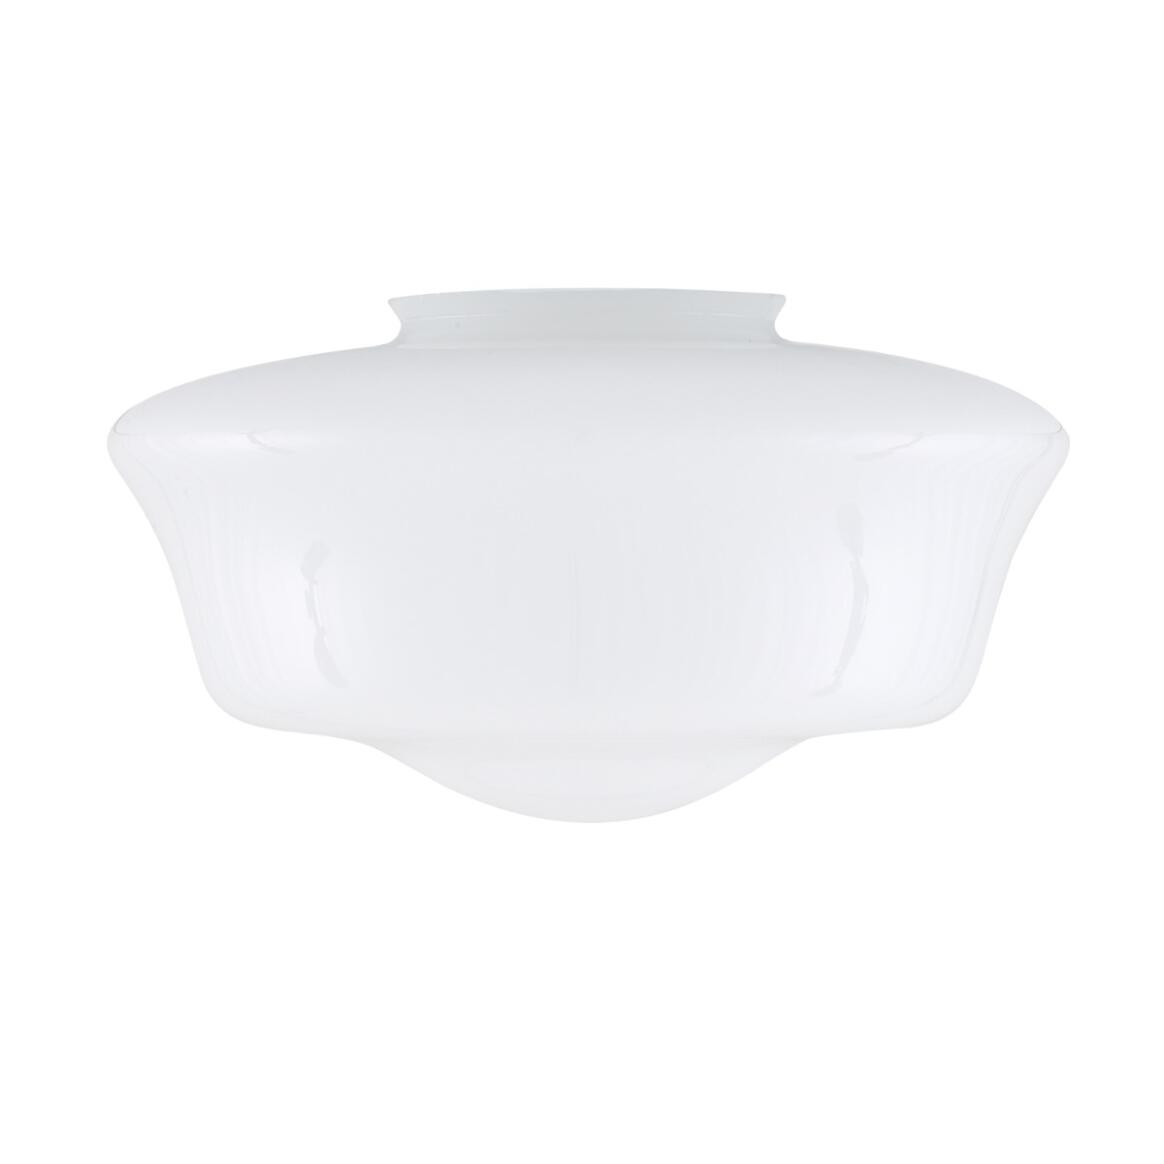 13.8" schoolhouse glass lamp shade main product image